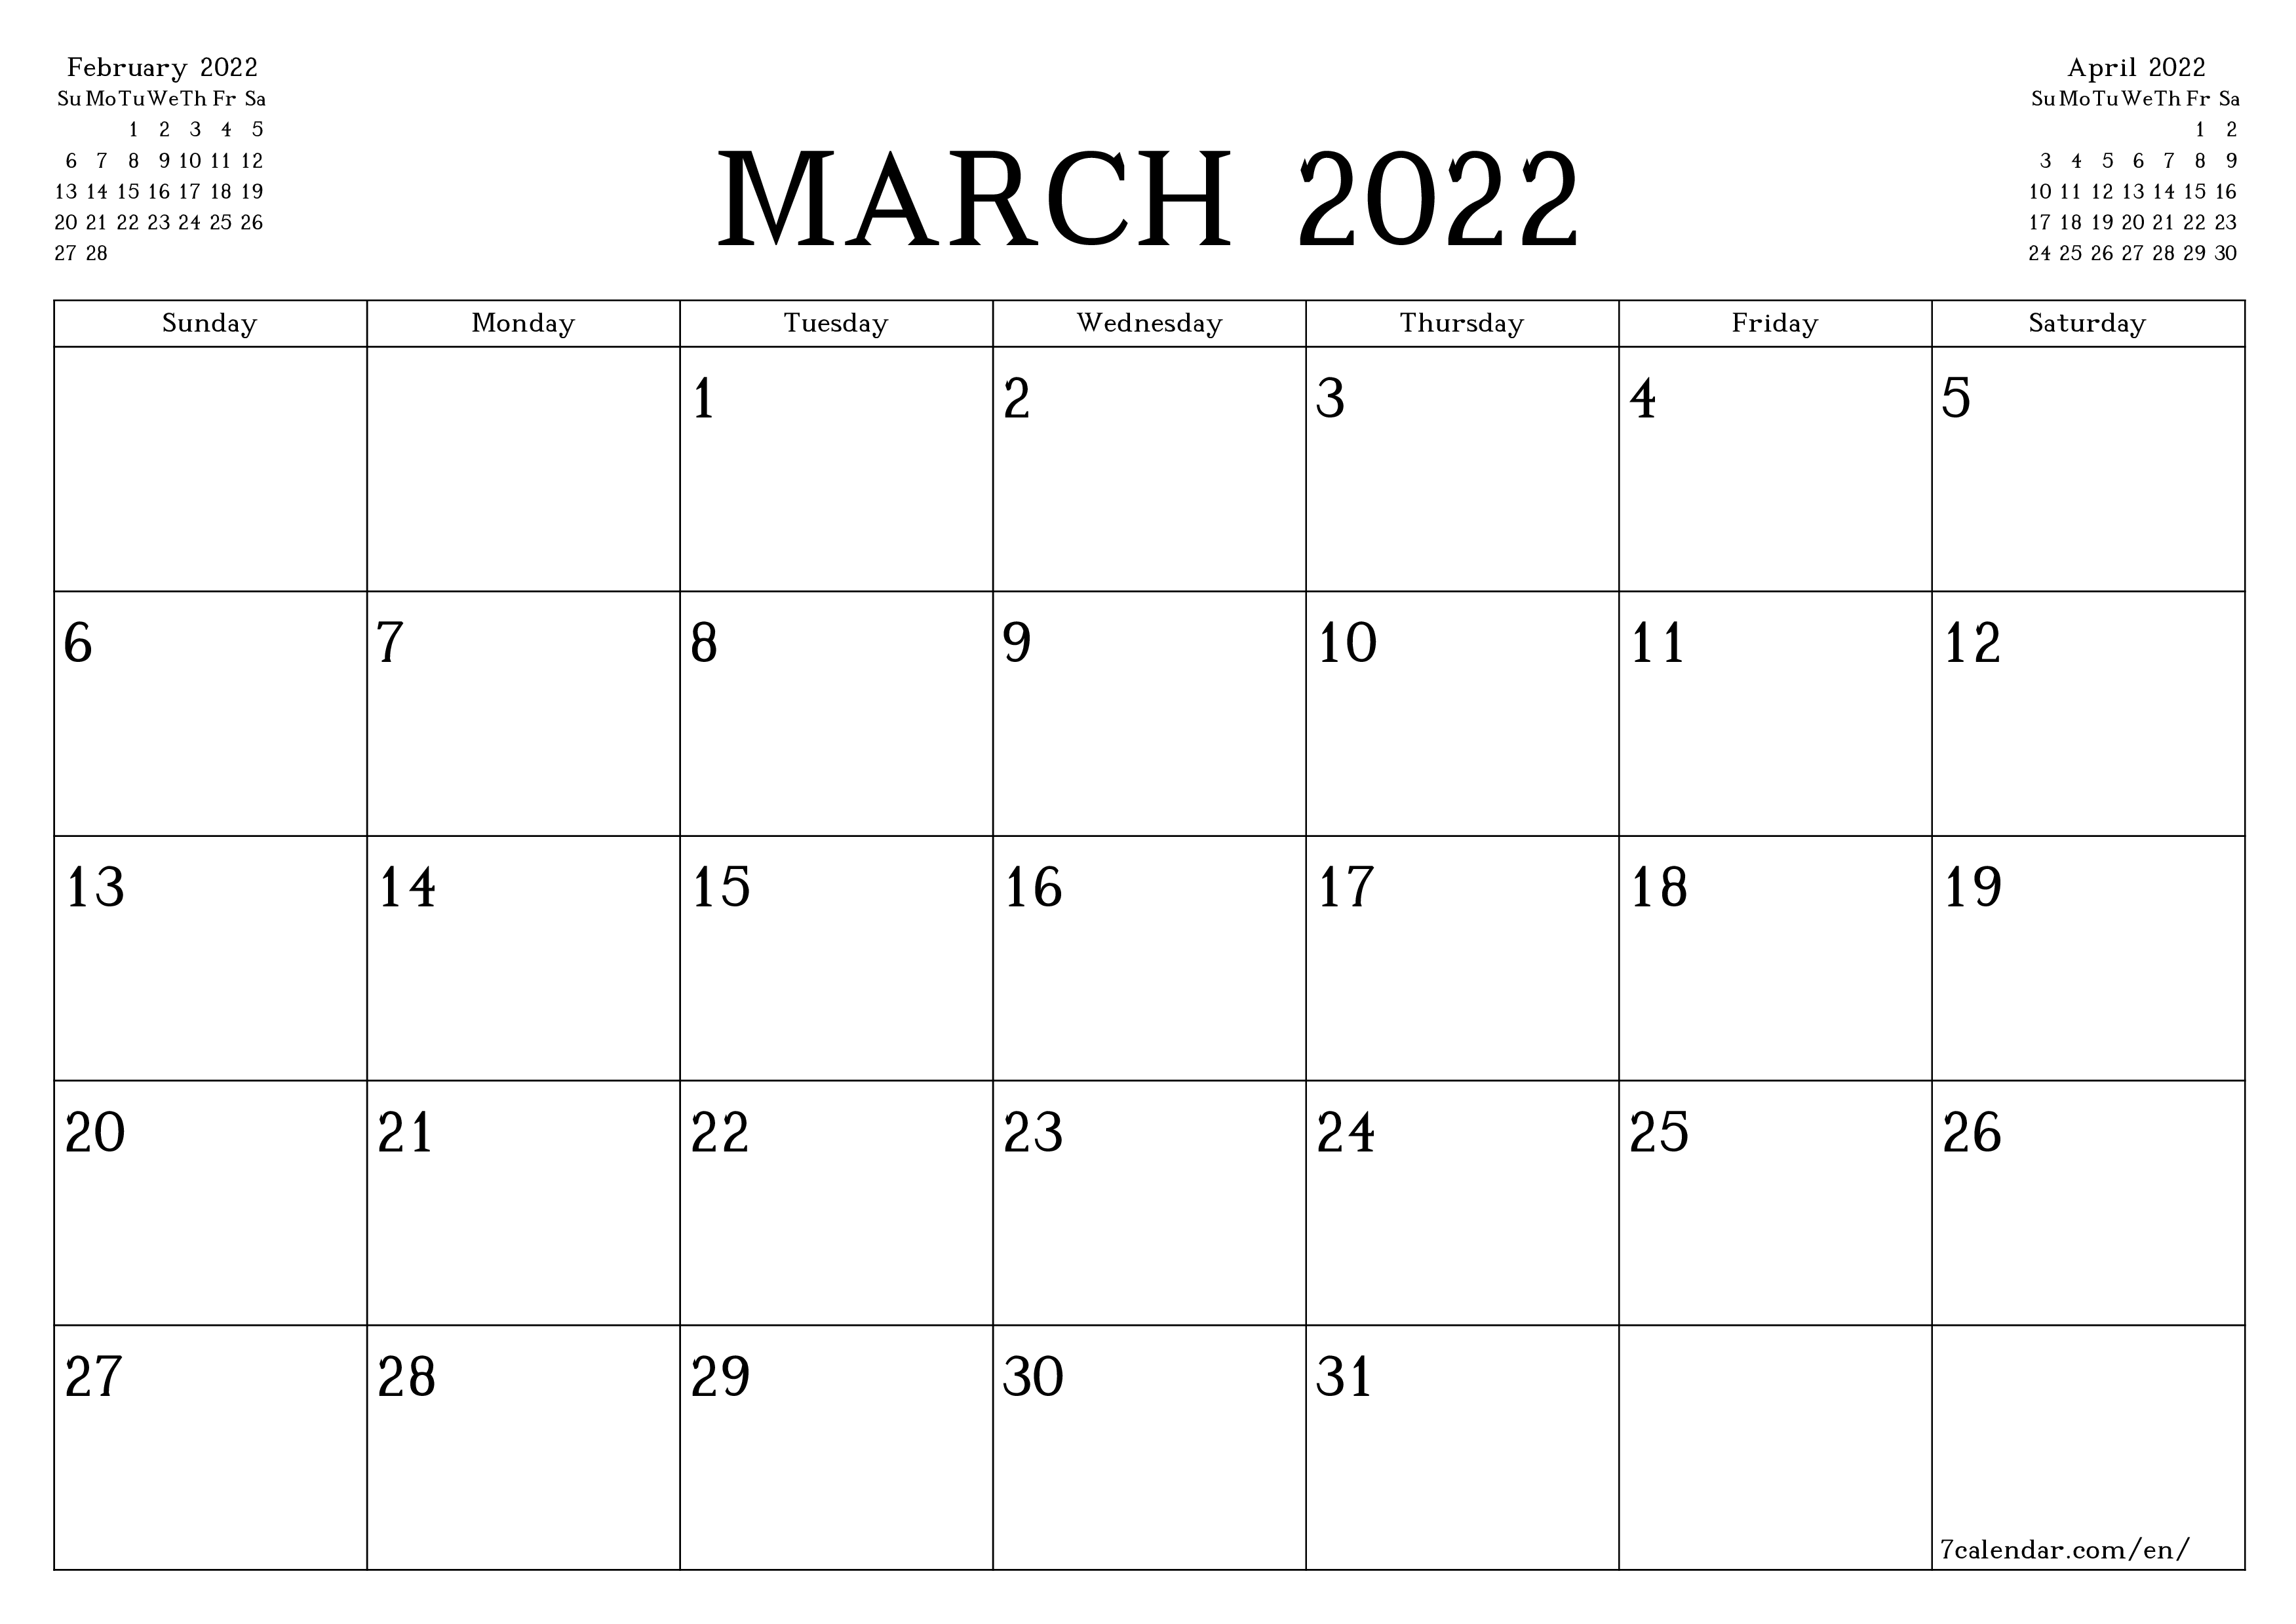 Blank monthly calendar planner for month March 2022 with notes save and print to PDF PNG English - 7calendar.com